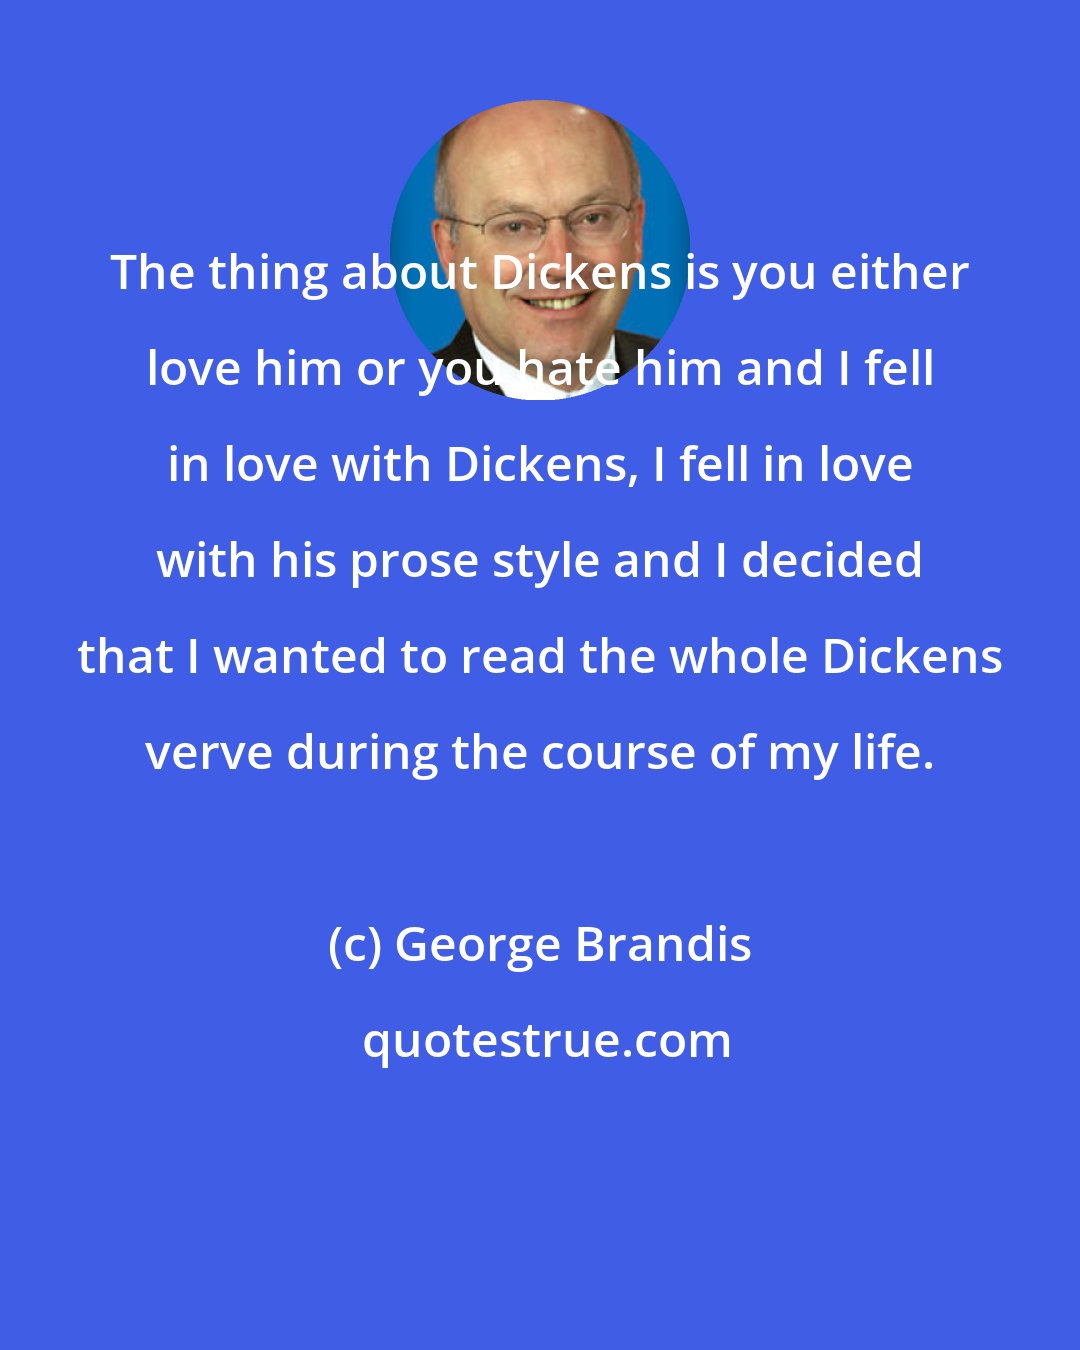 George Brandis: The thing about Dickens is you either love him or you hate him and I fell in love with Dickens, I fell in love with his prose style and I decided that I wanted to read the whole Dickens verve during the course of my life.